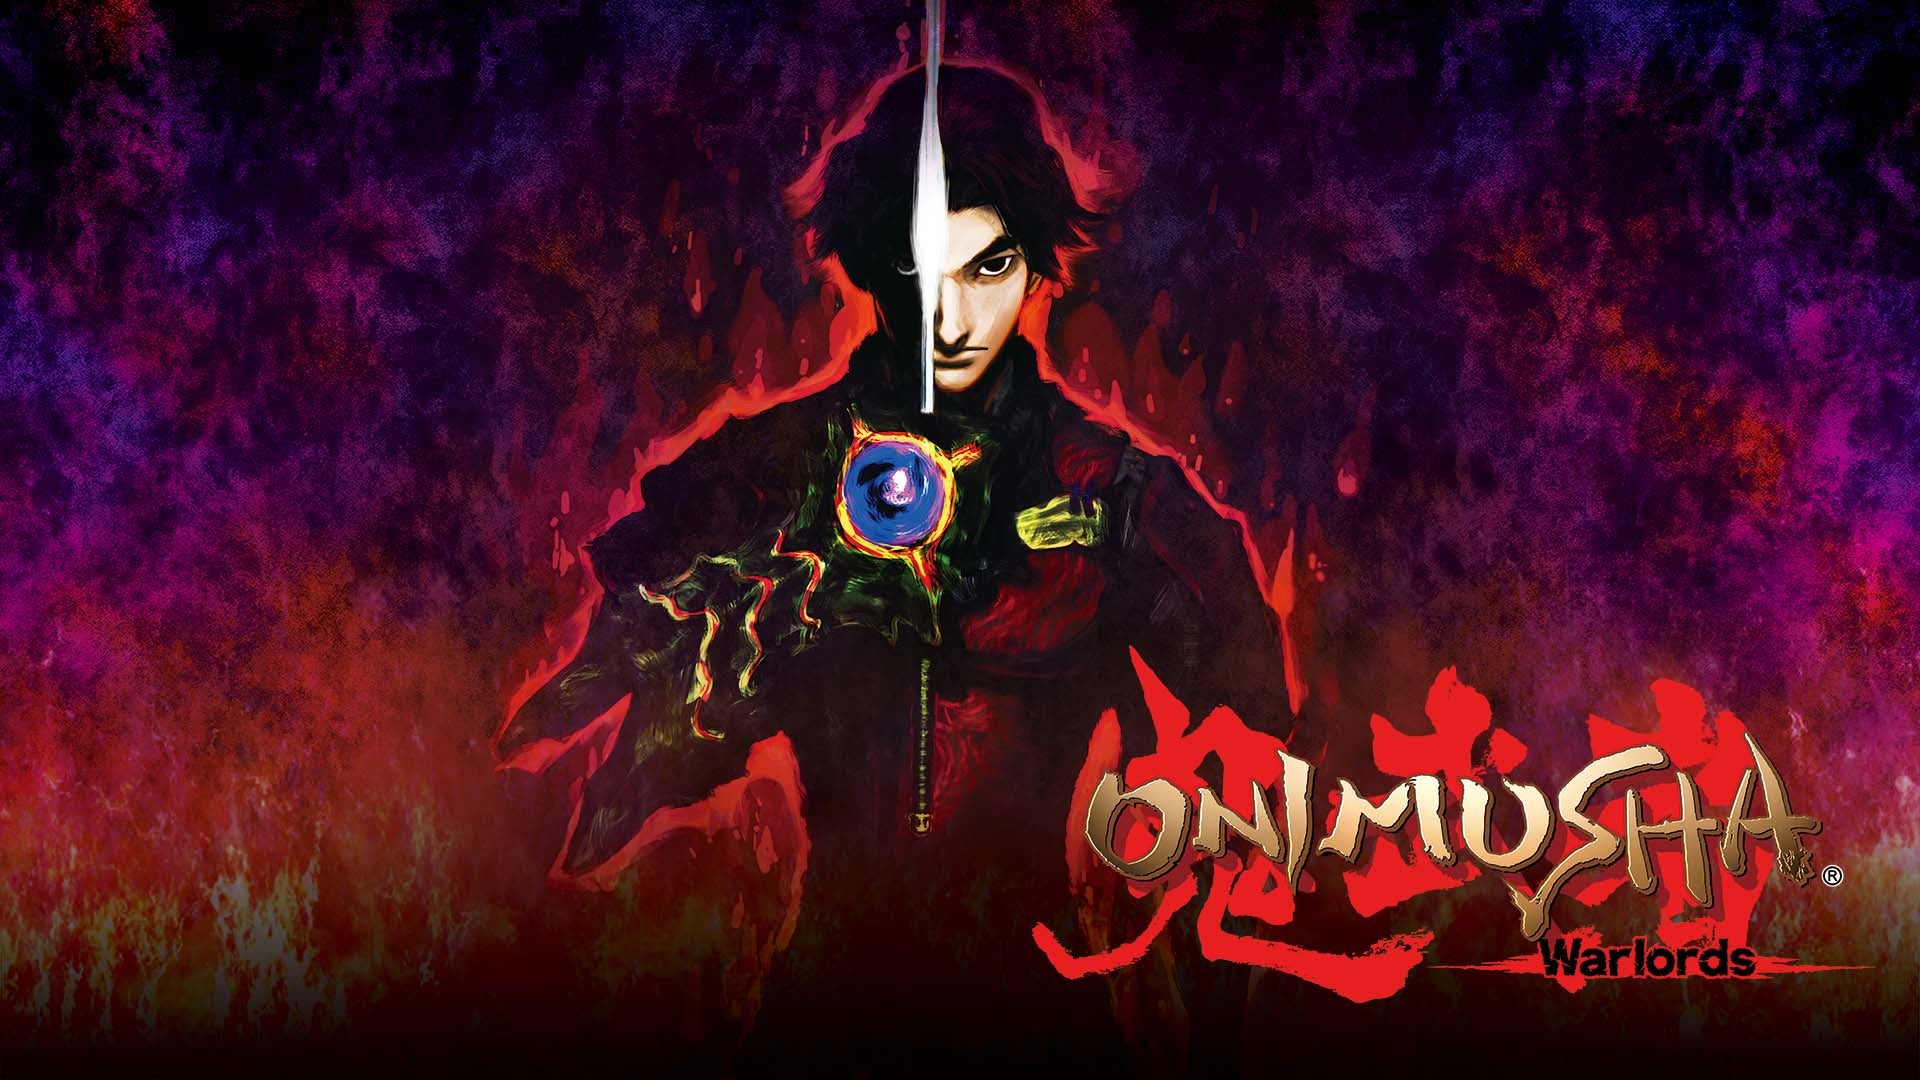 Image for Onimusha: Warlords is being remastered for PC and consoles